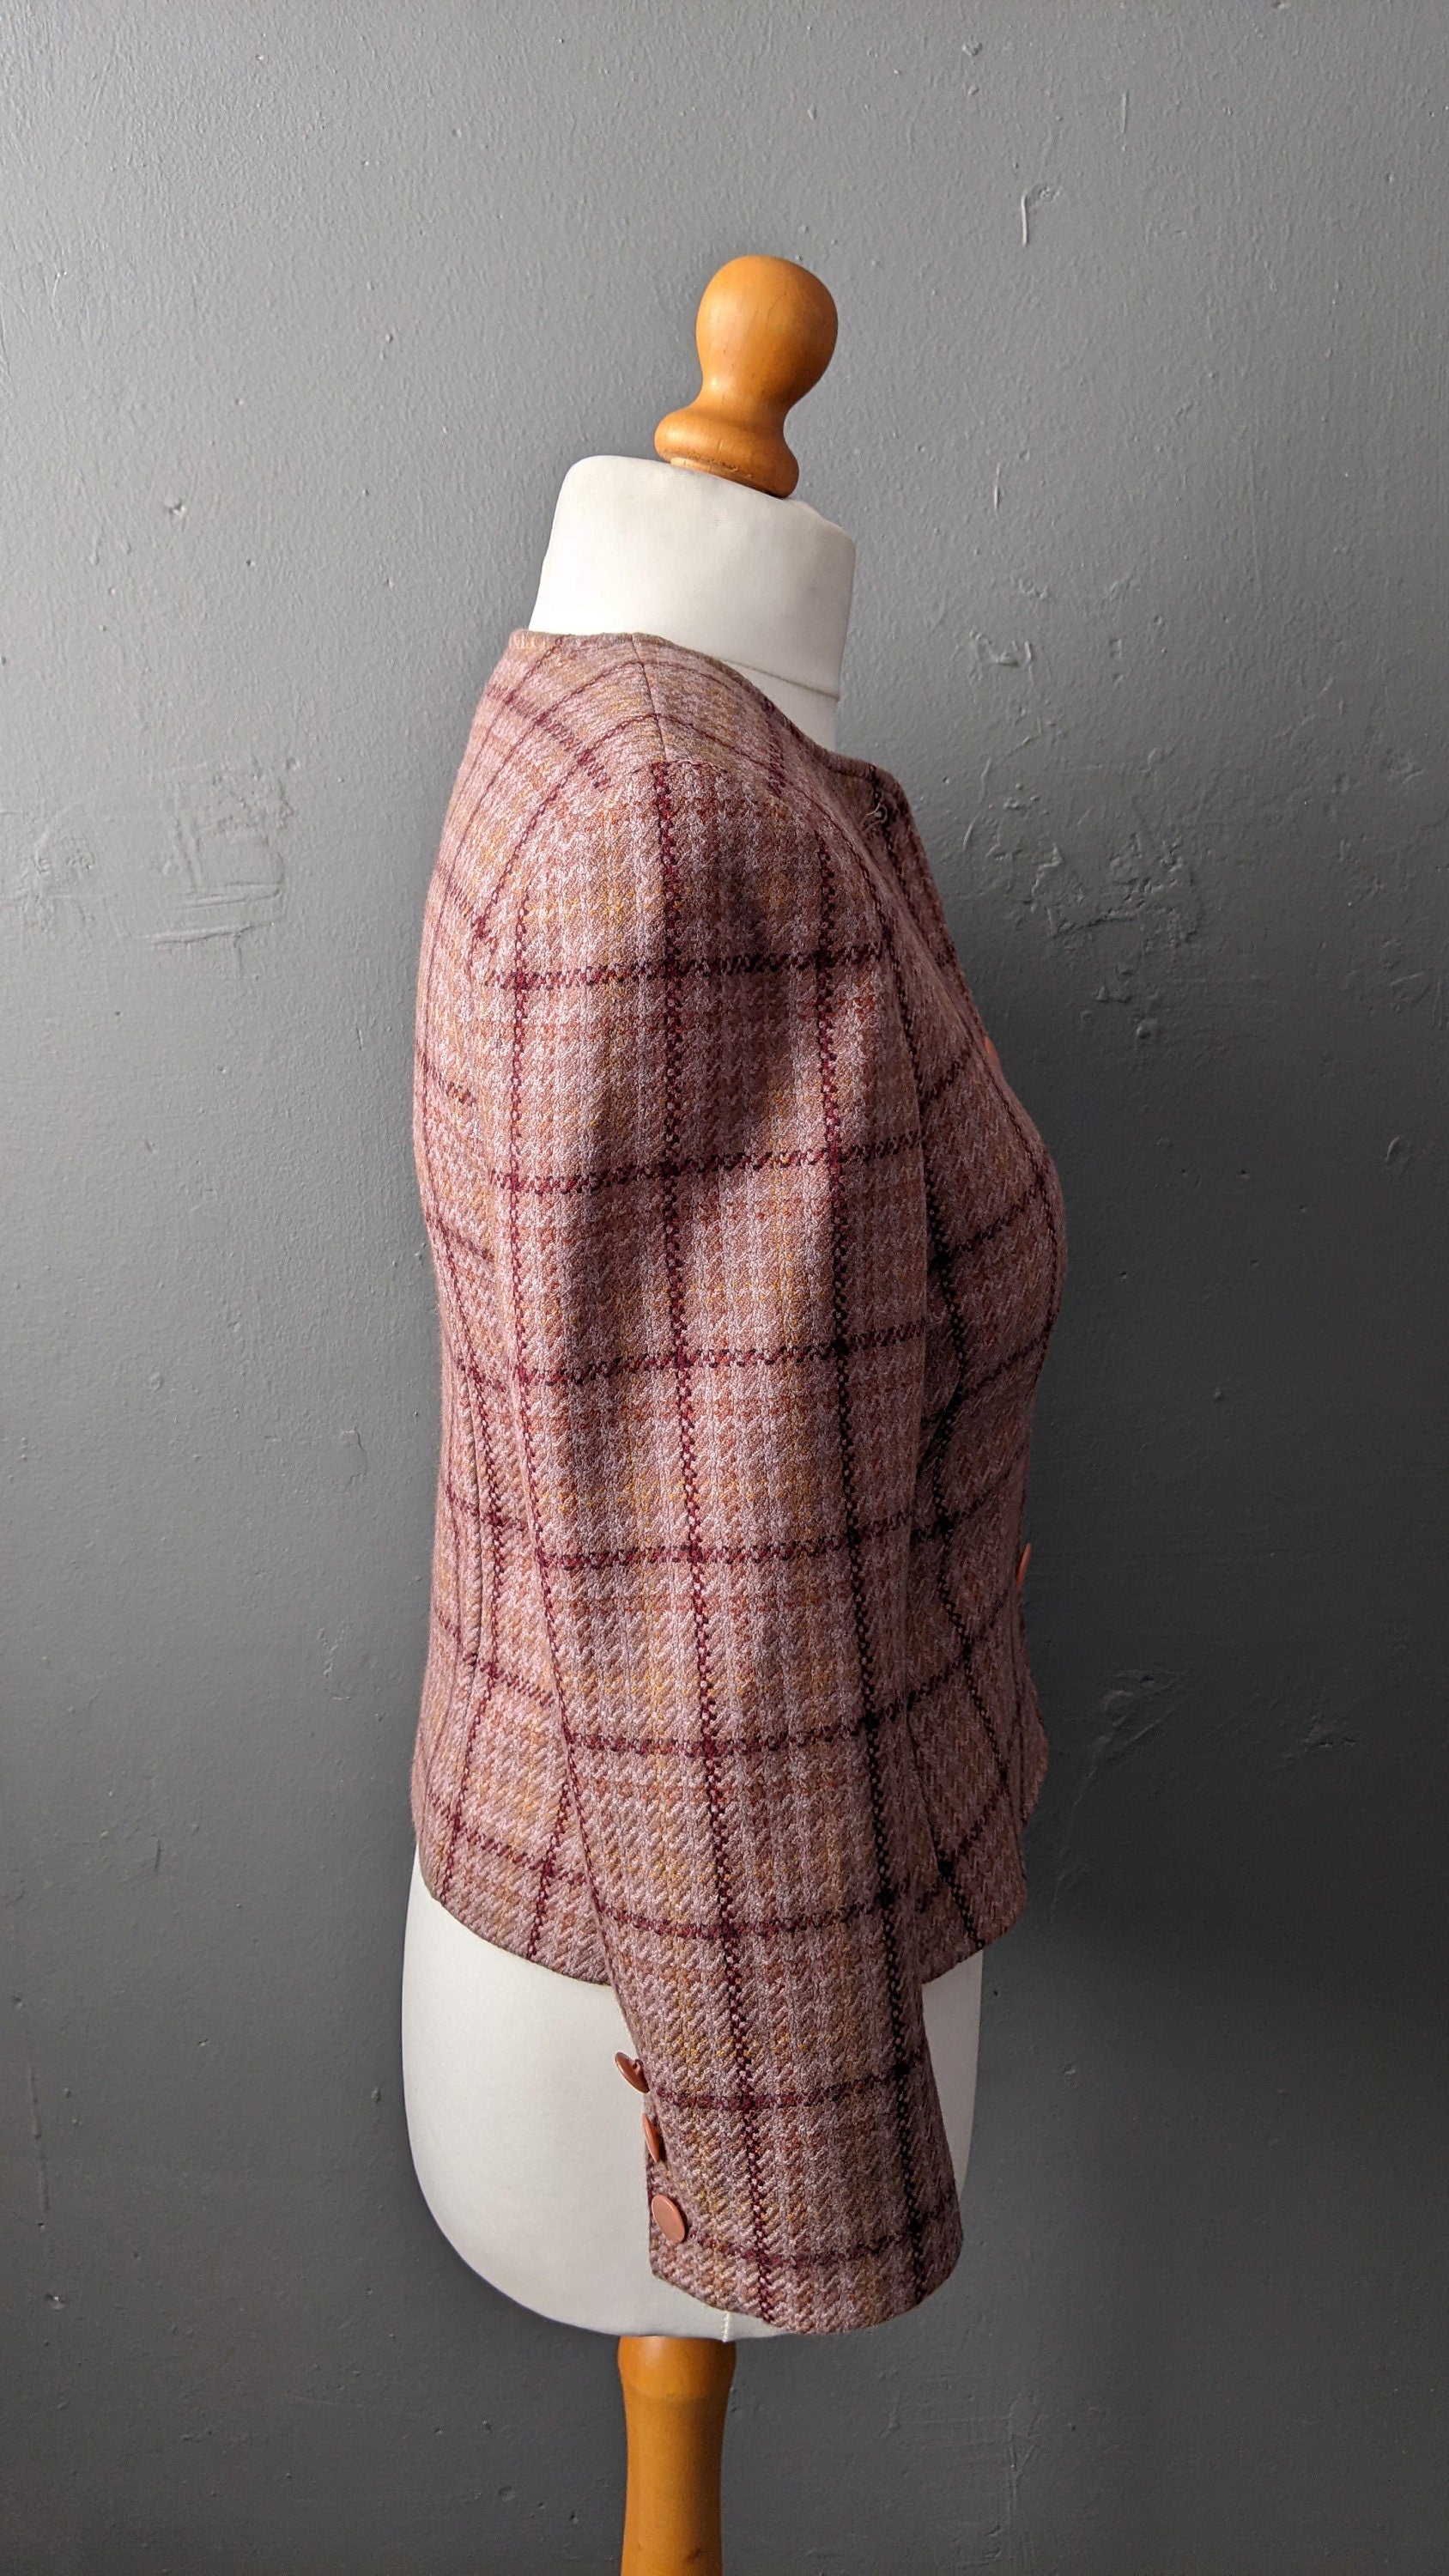 90s Check Wool Tweed Jacket, Fitted Dress Blazer, Size Small Medium